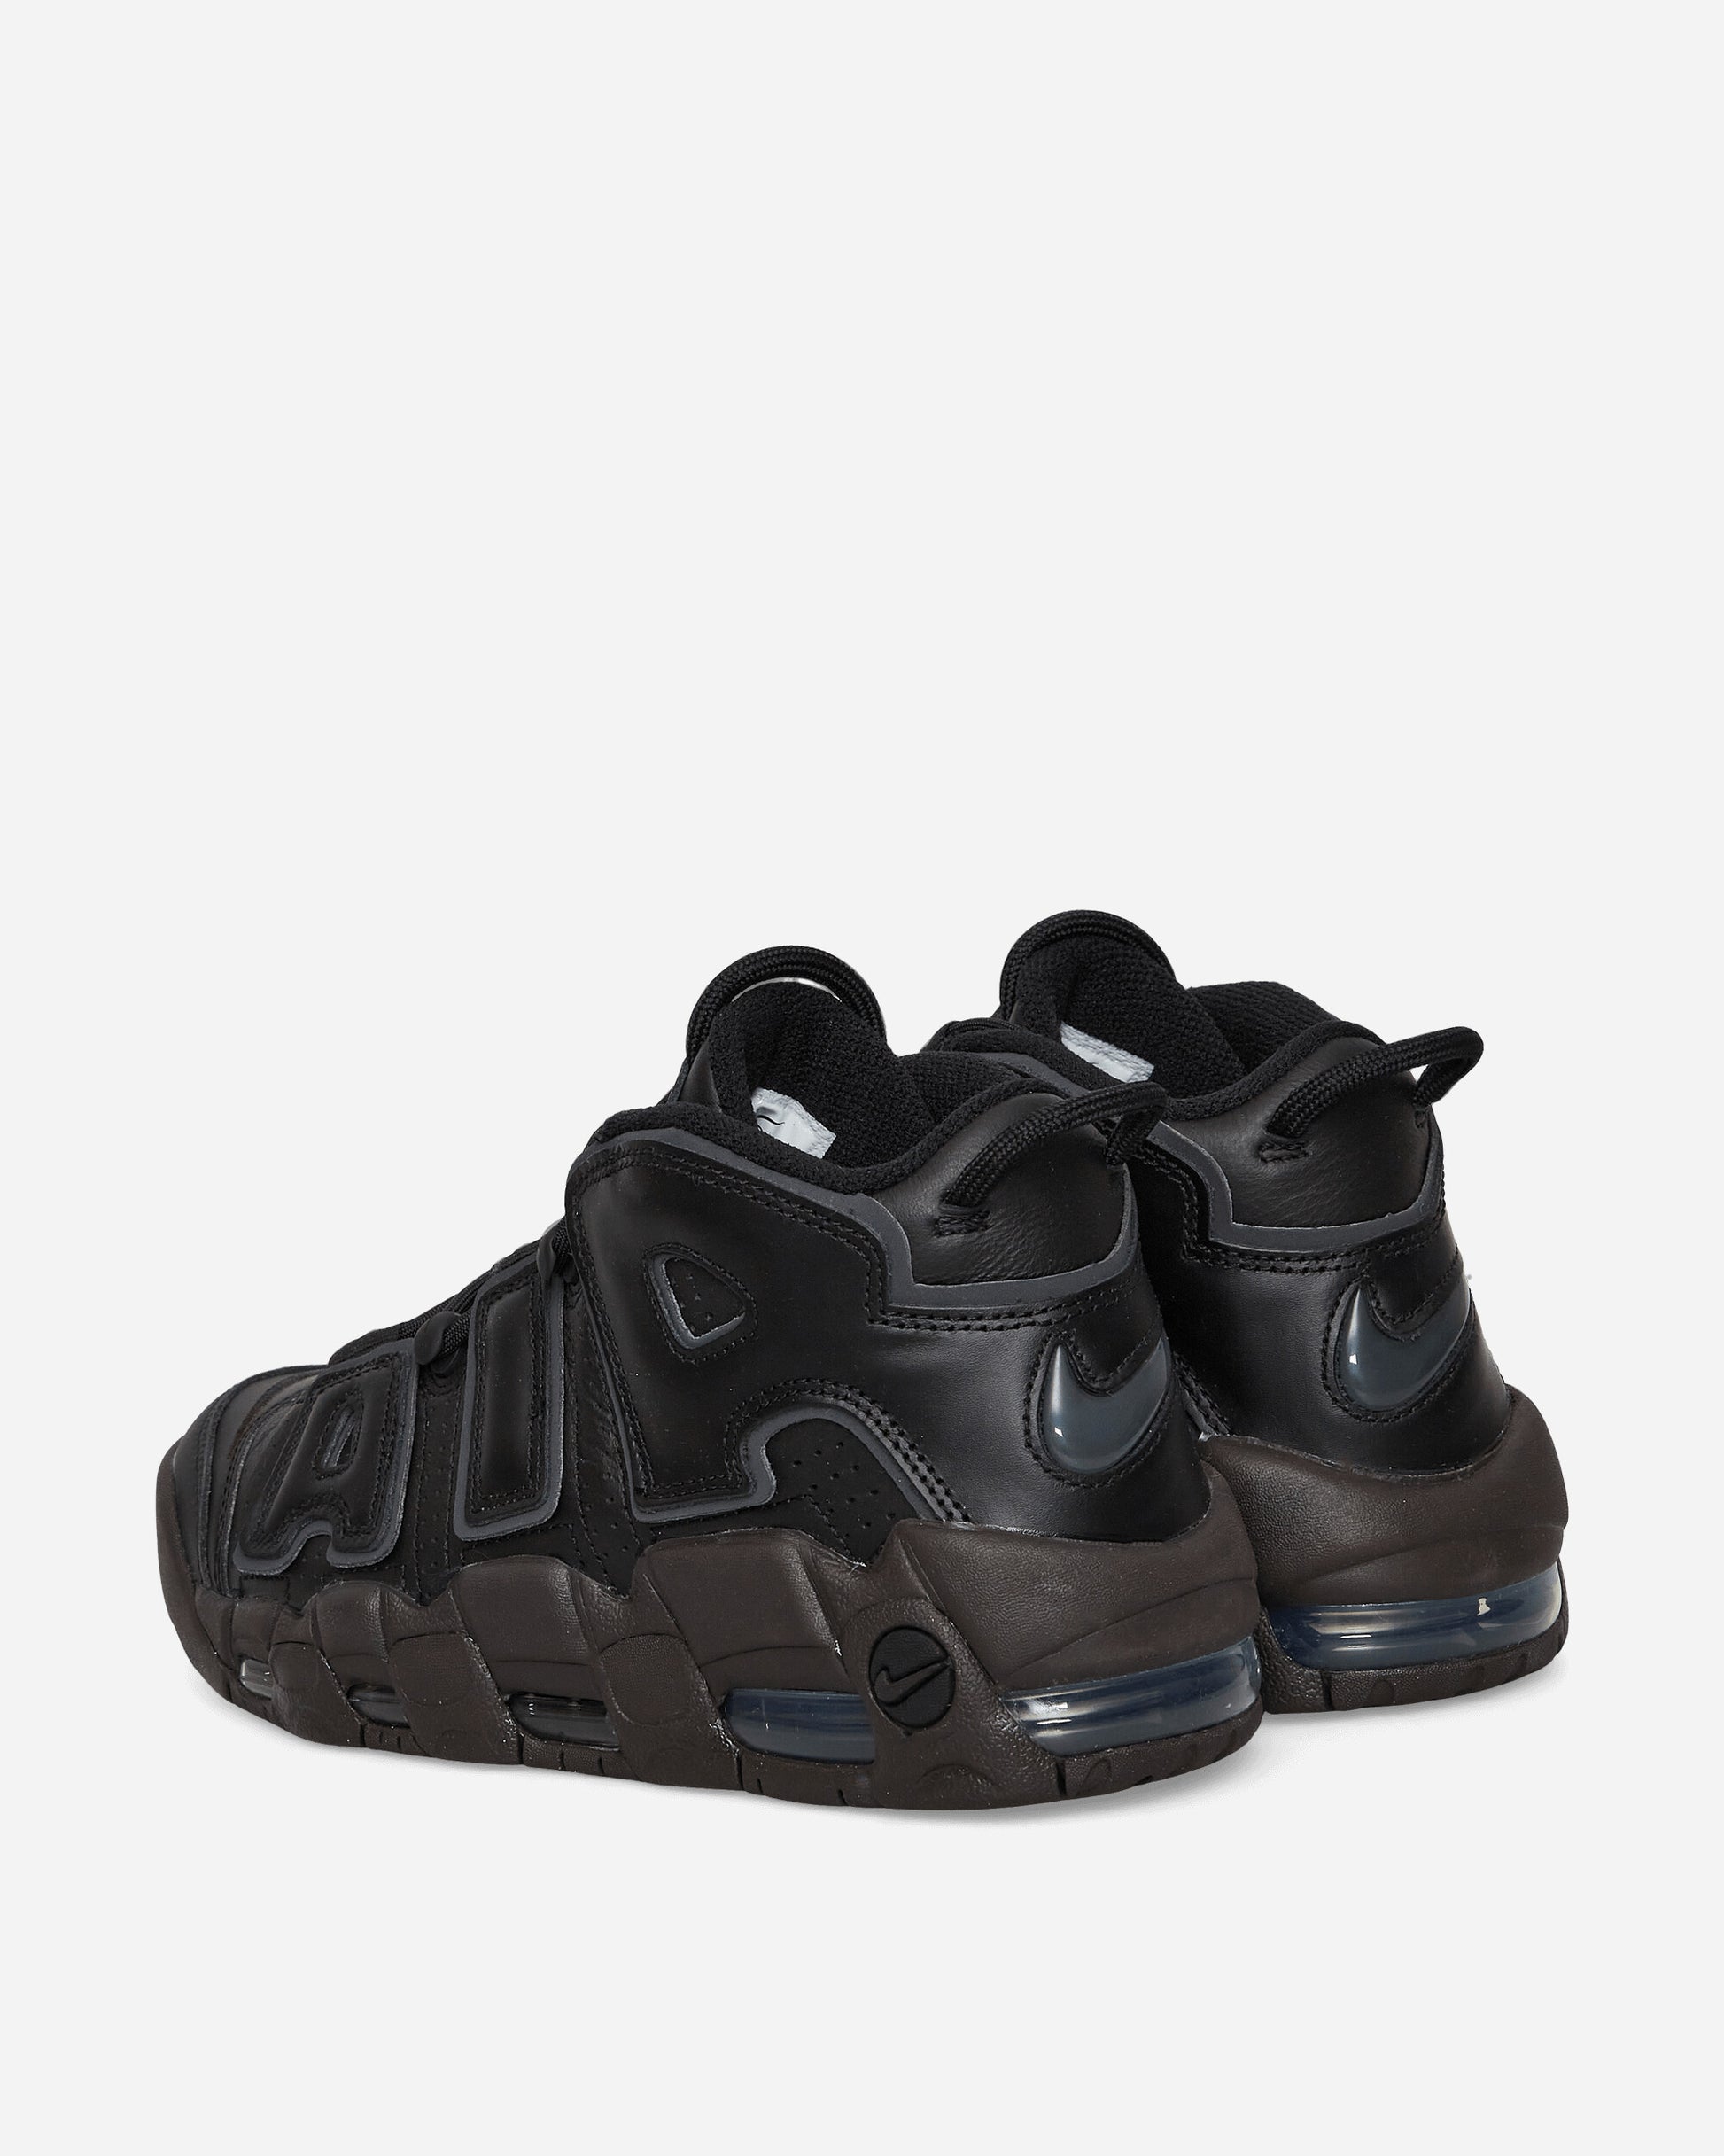 Nike Wmns Air More Uptempo Black/Anthracite Sneakers Mid DV1137-001